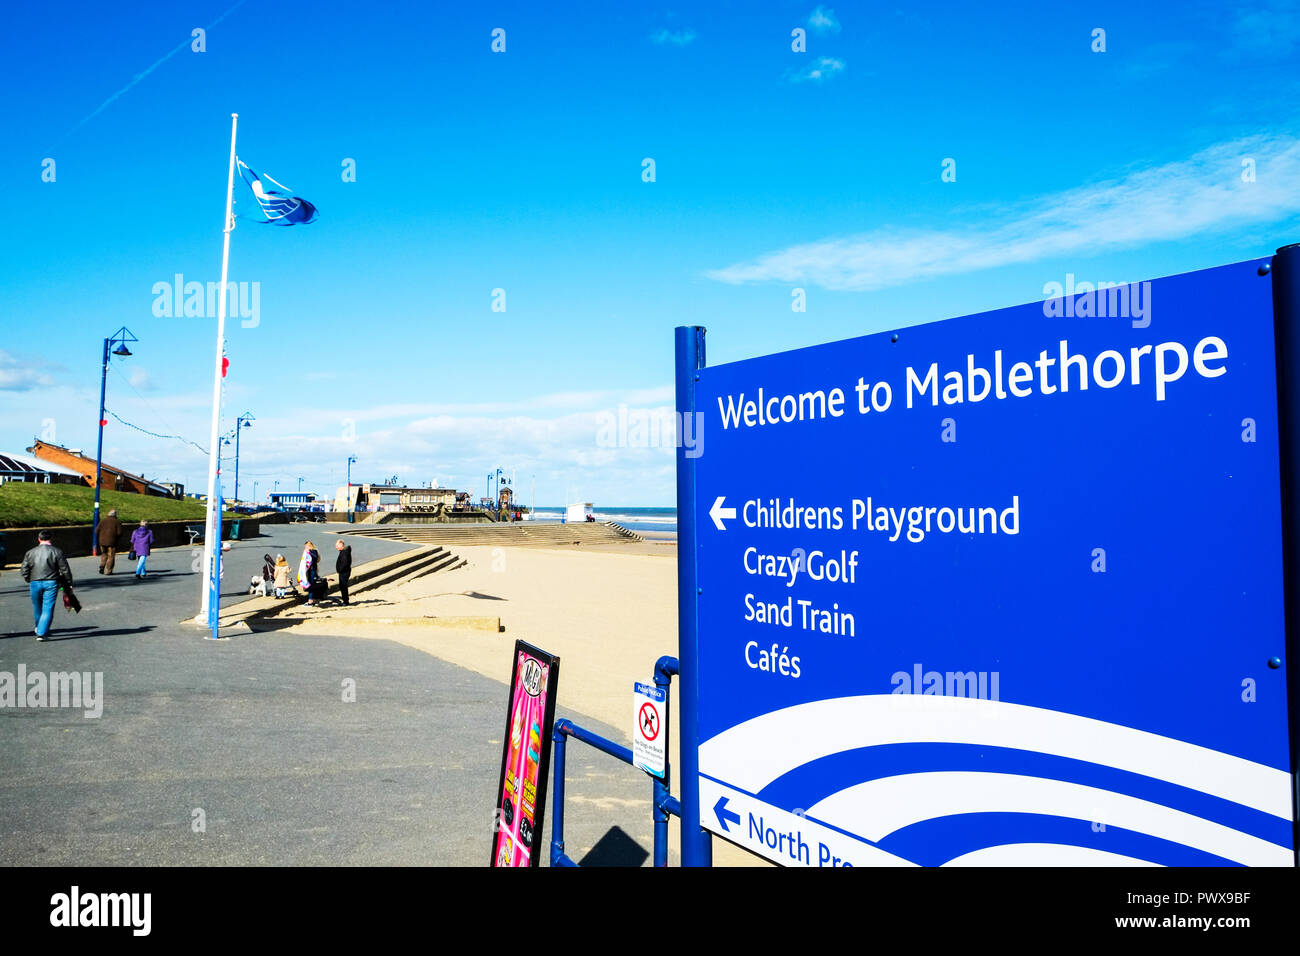 Mablethorpe, Lincolnshire, UK, Welcome to Mablethorpe sign, Mablethorpe UK, UK seaside towns, Mablethorpe town UK, seaside towns UK, seaside town, UK Stock Photo